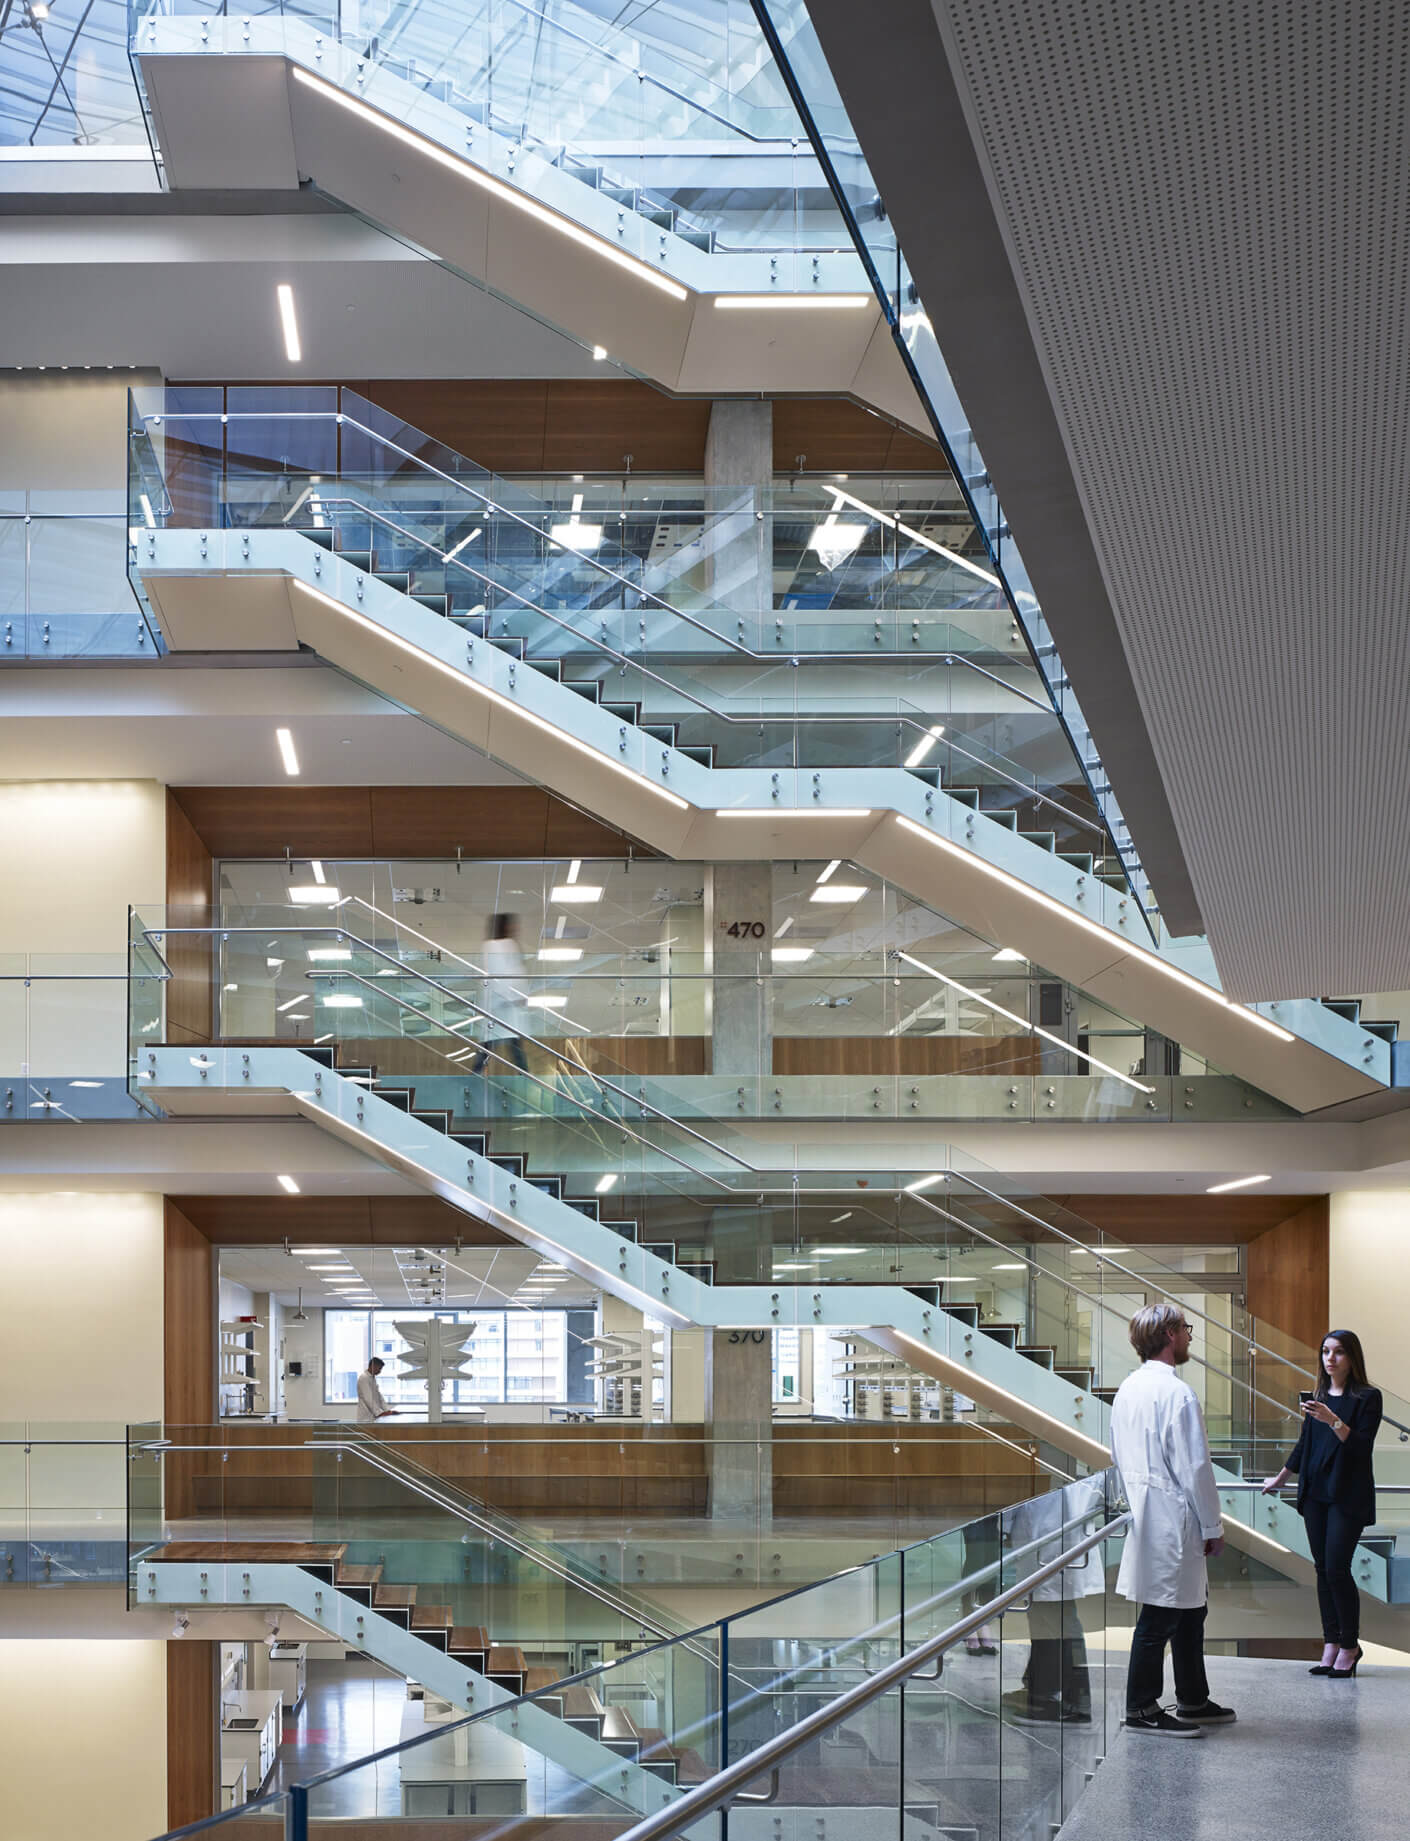 Large atrium with stairs and views to four stories of research labs